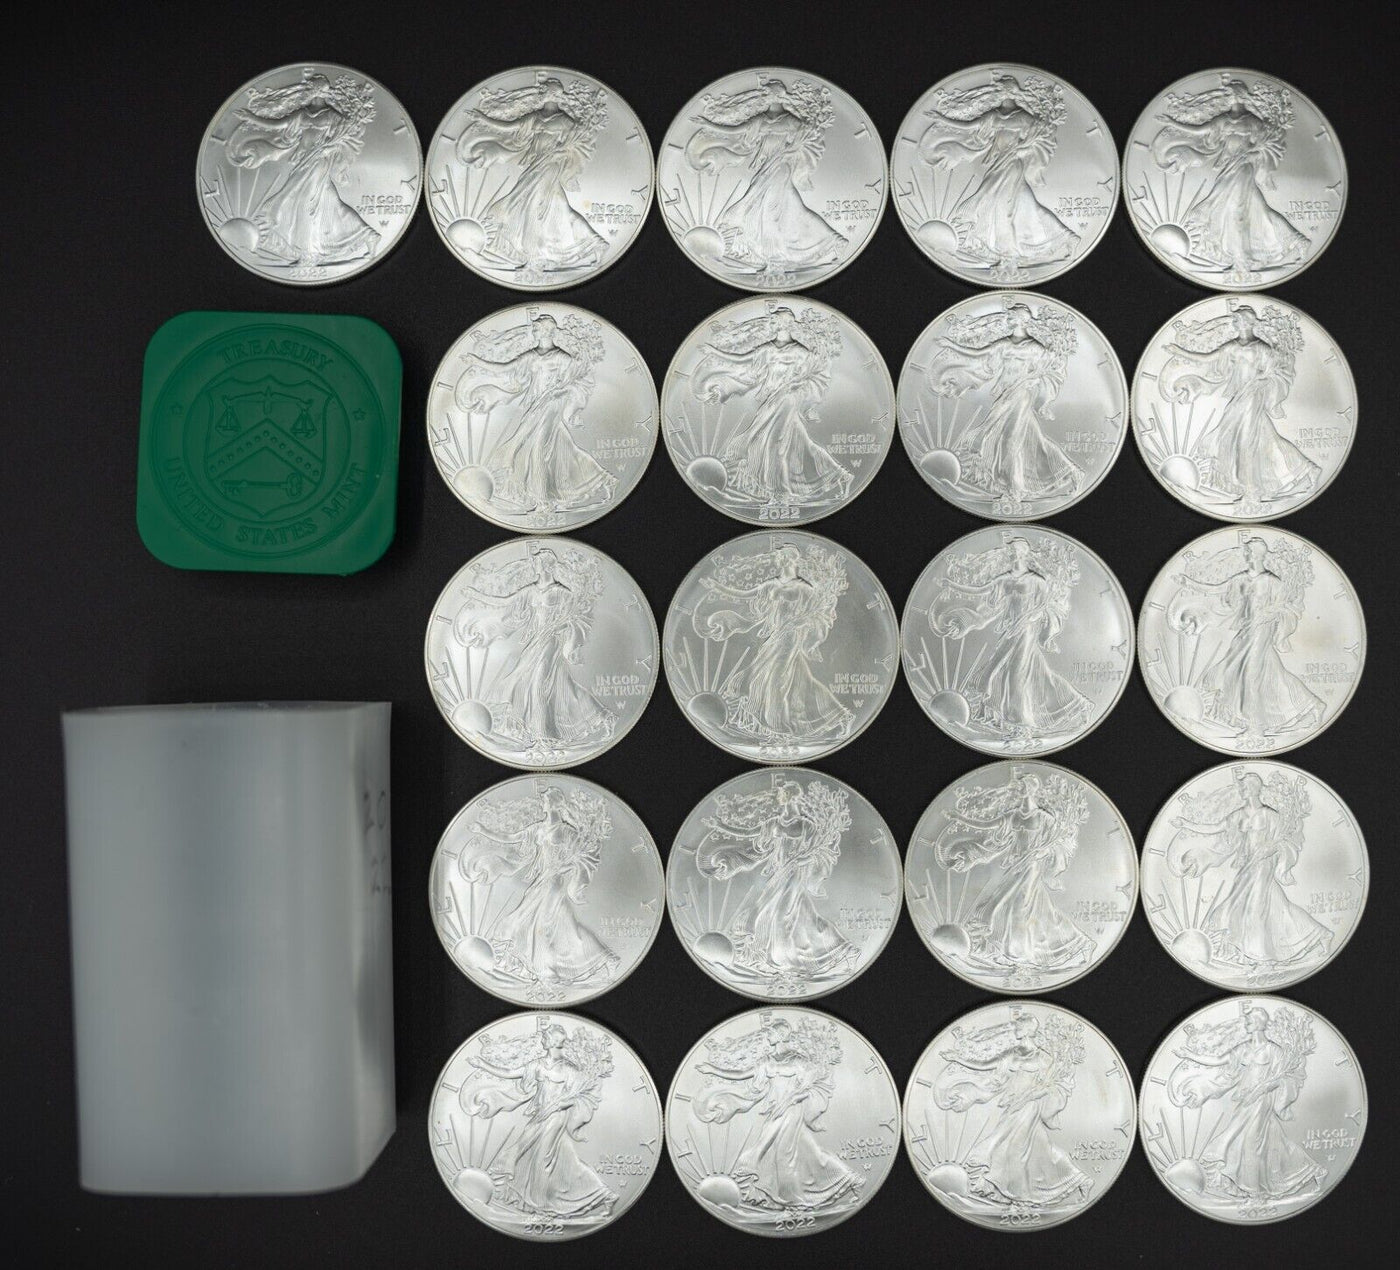 Roll of 2022 Fine American Eagle Silver Dollars - 20 pieces per roll